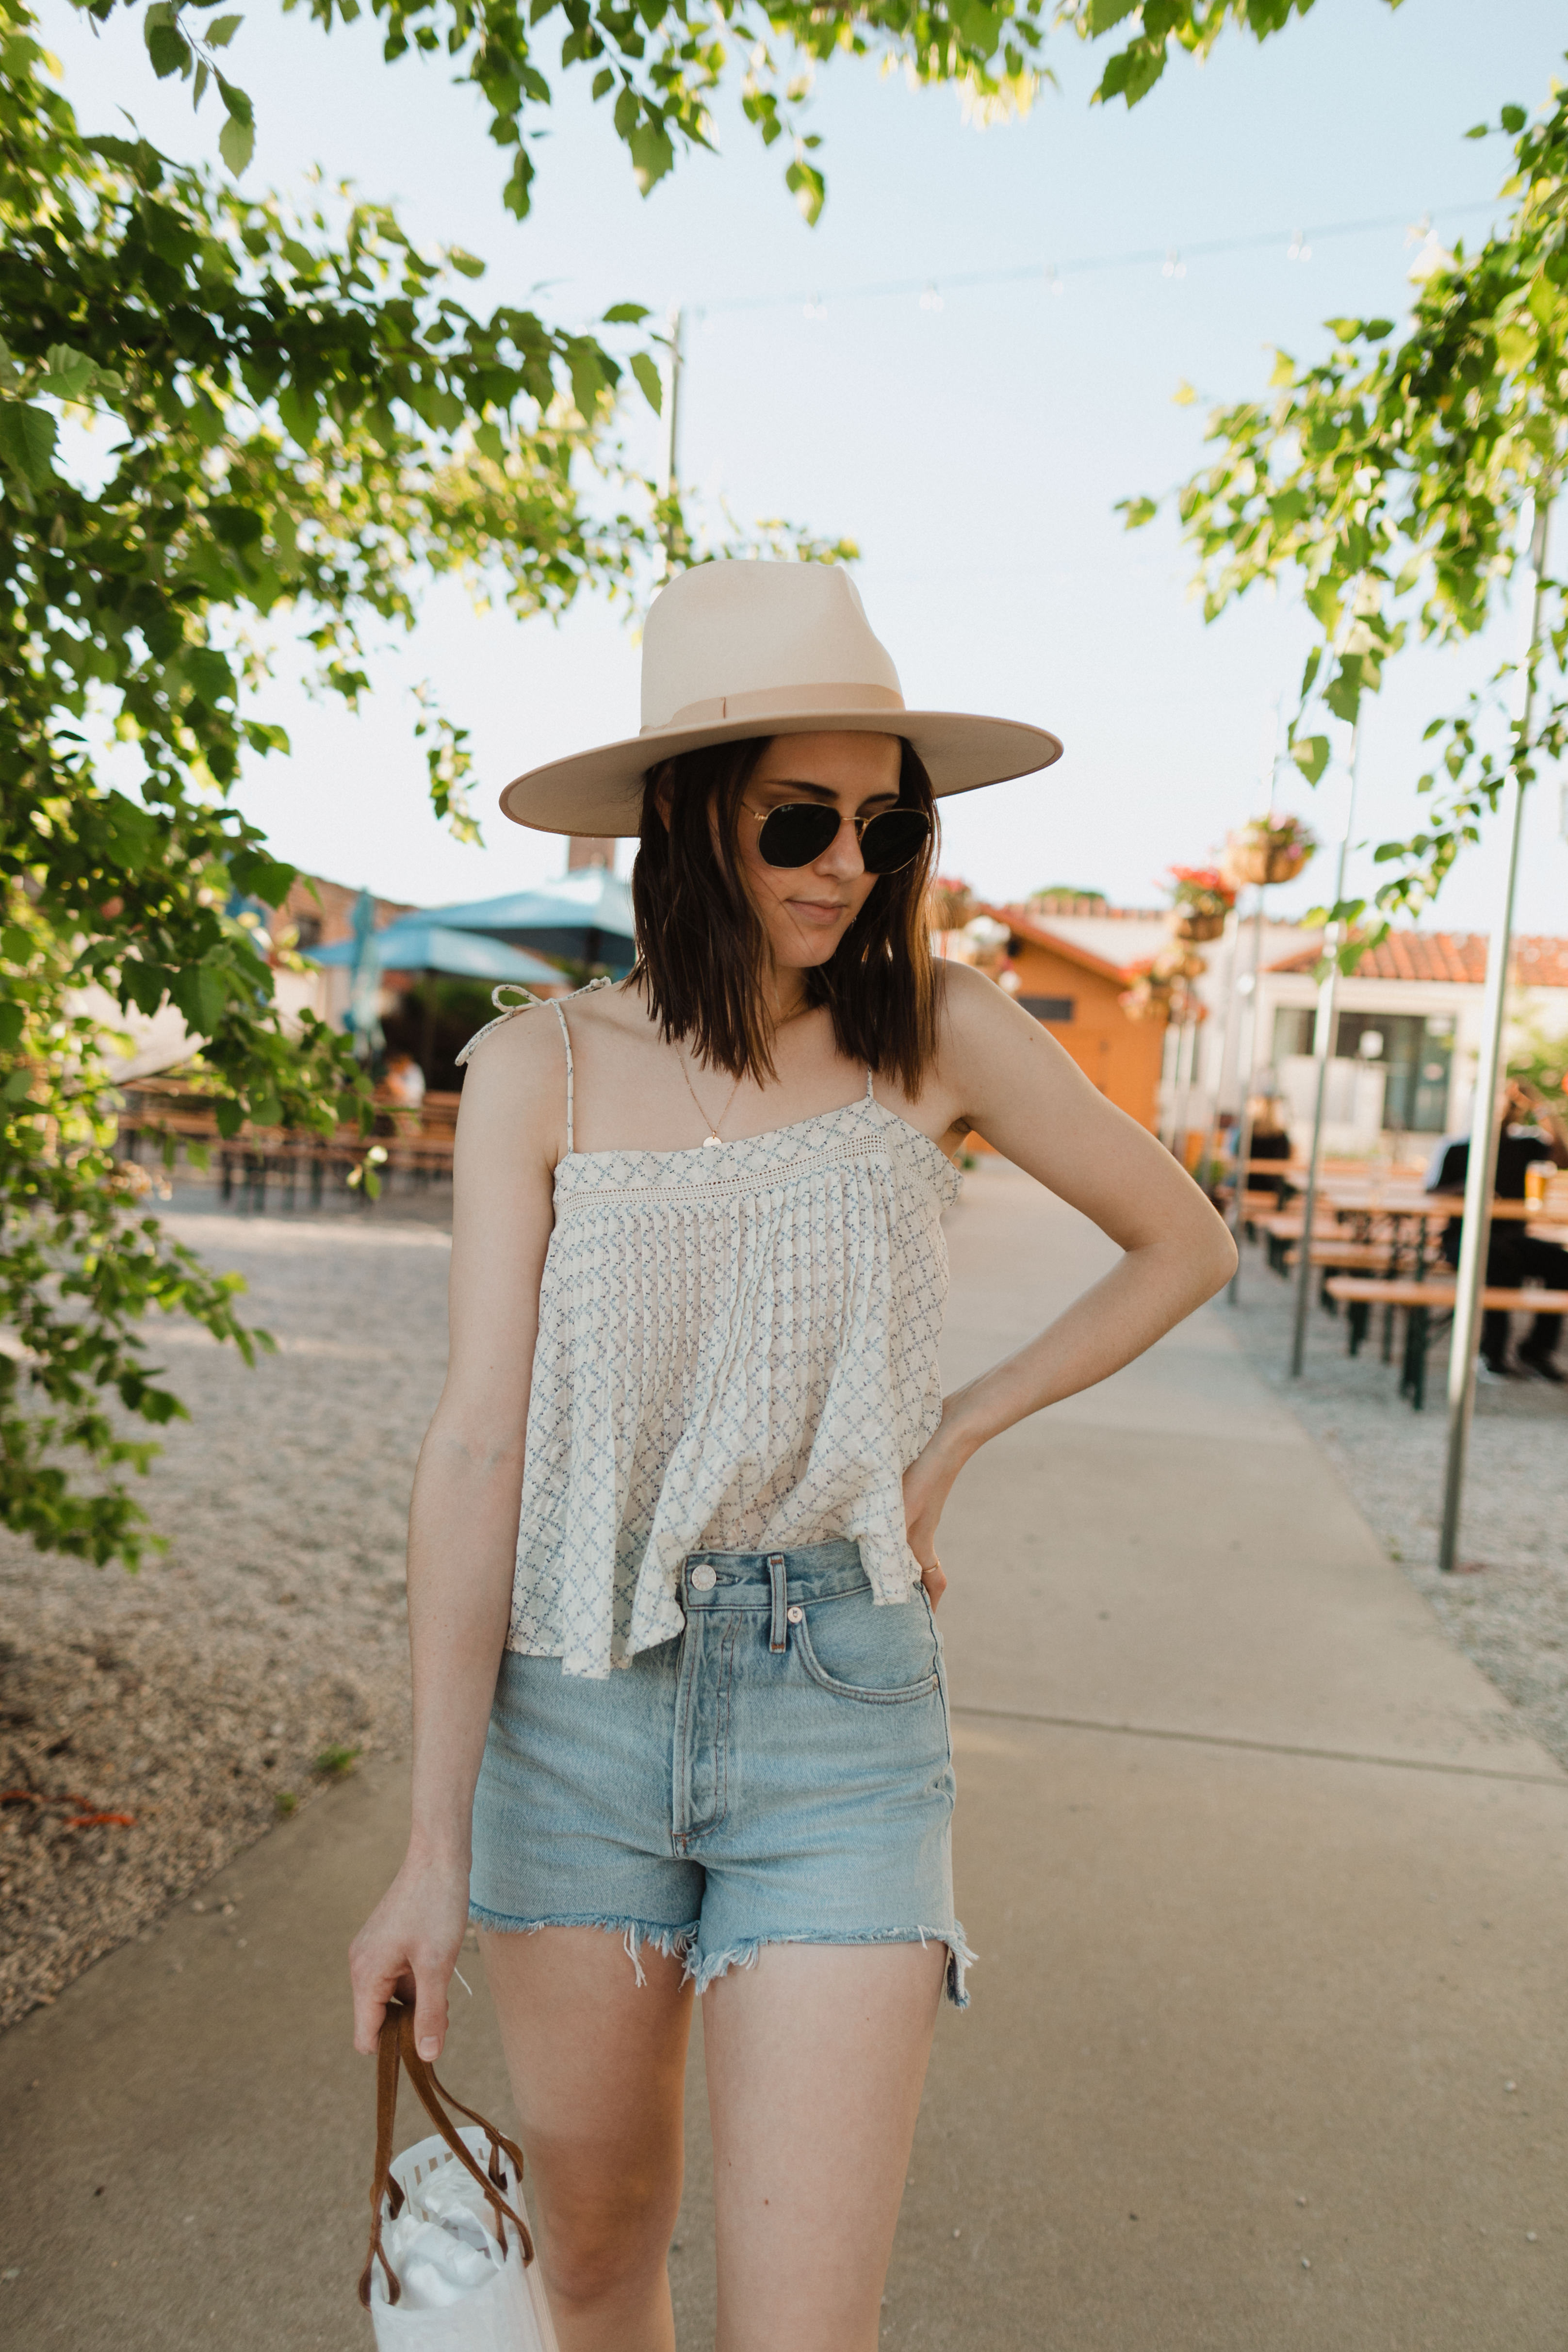 Lovestitch Clothing: 7 Outfits To Wear This Summer | casual summer outfits | lack of color hat outfit | cami outfit summer | cami outfit casual | summer outfit ideas casual | summer outfit ideas easy | Oh Darling Blog